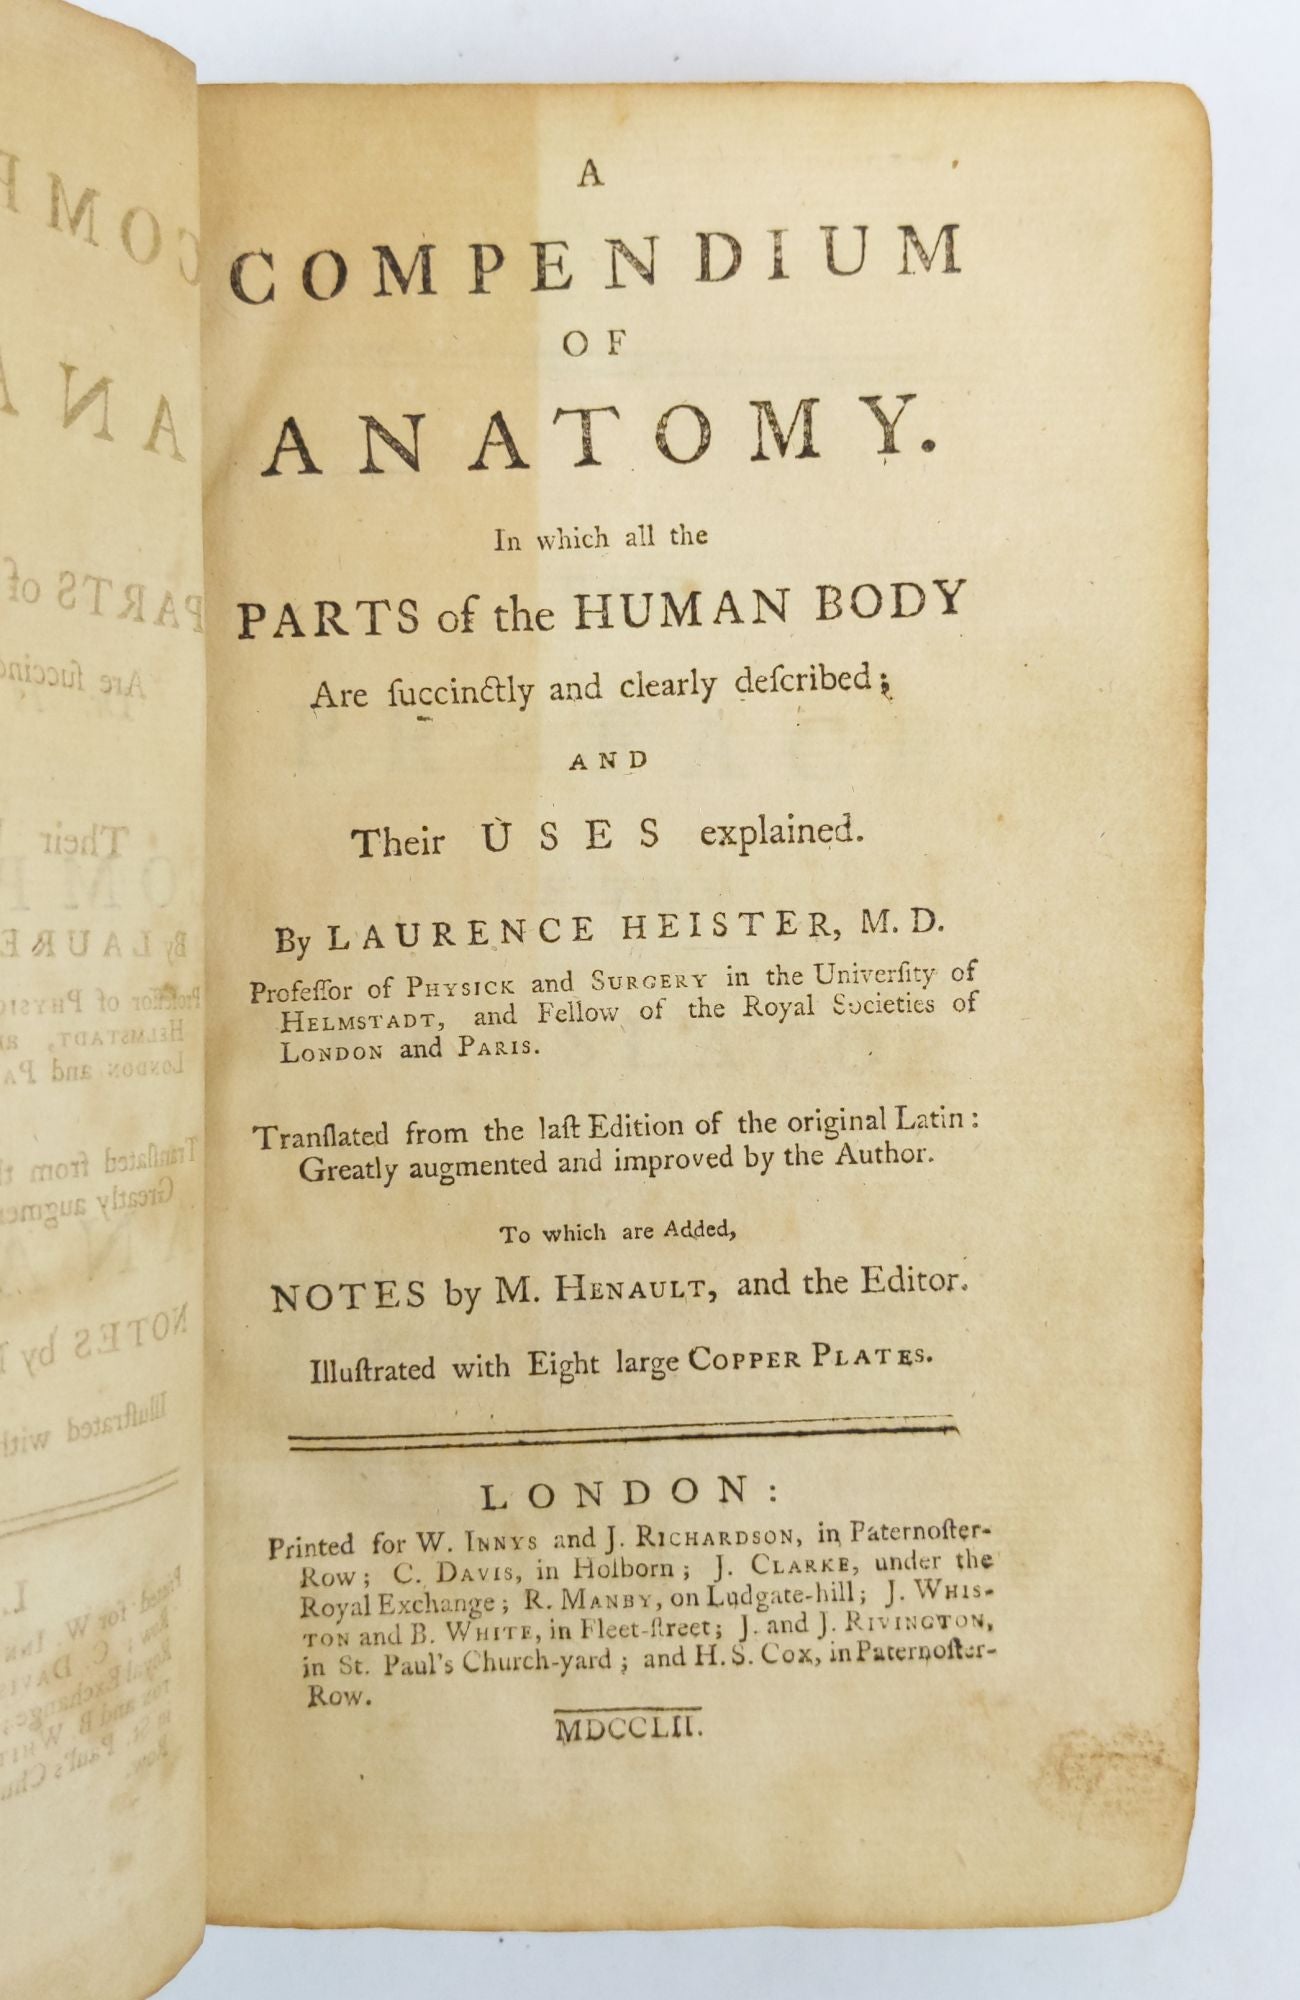 Product Image for A COMPENDIUM OF ANATOMY. IN WHICH ALL THE PARTS OF THE HUMAN BODY ARE SUCCINCTLY AND CLEARLY DESCRIBED; AND THEIR USES EXPLAINED. TRANSLATED FROM THE LAST EDITION OF THE ORIGINAL LATIN: GREATLY AUGMENTED AND IMPROVED BY THE AUTHOR. TO WHICH ARE ADDED, NOT